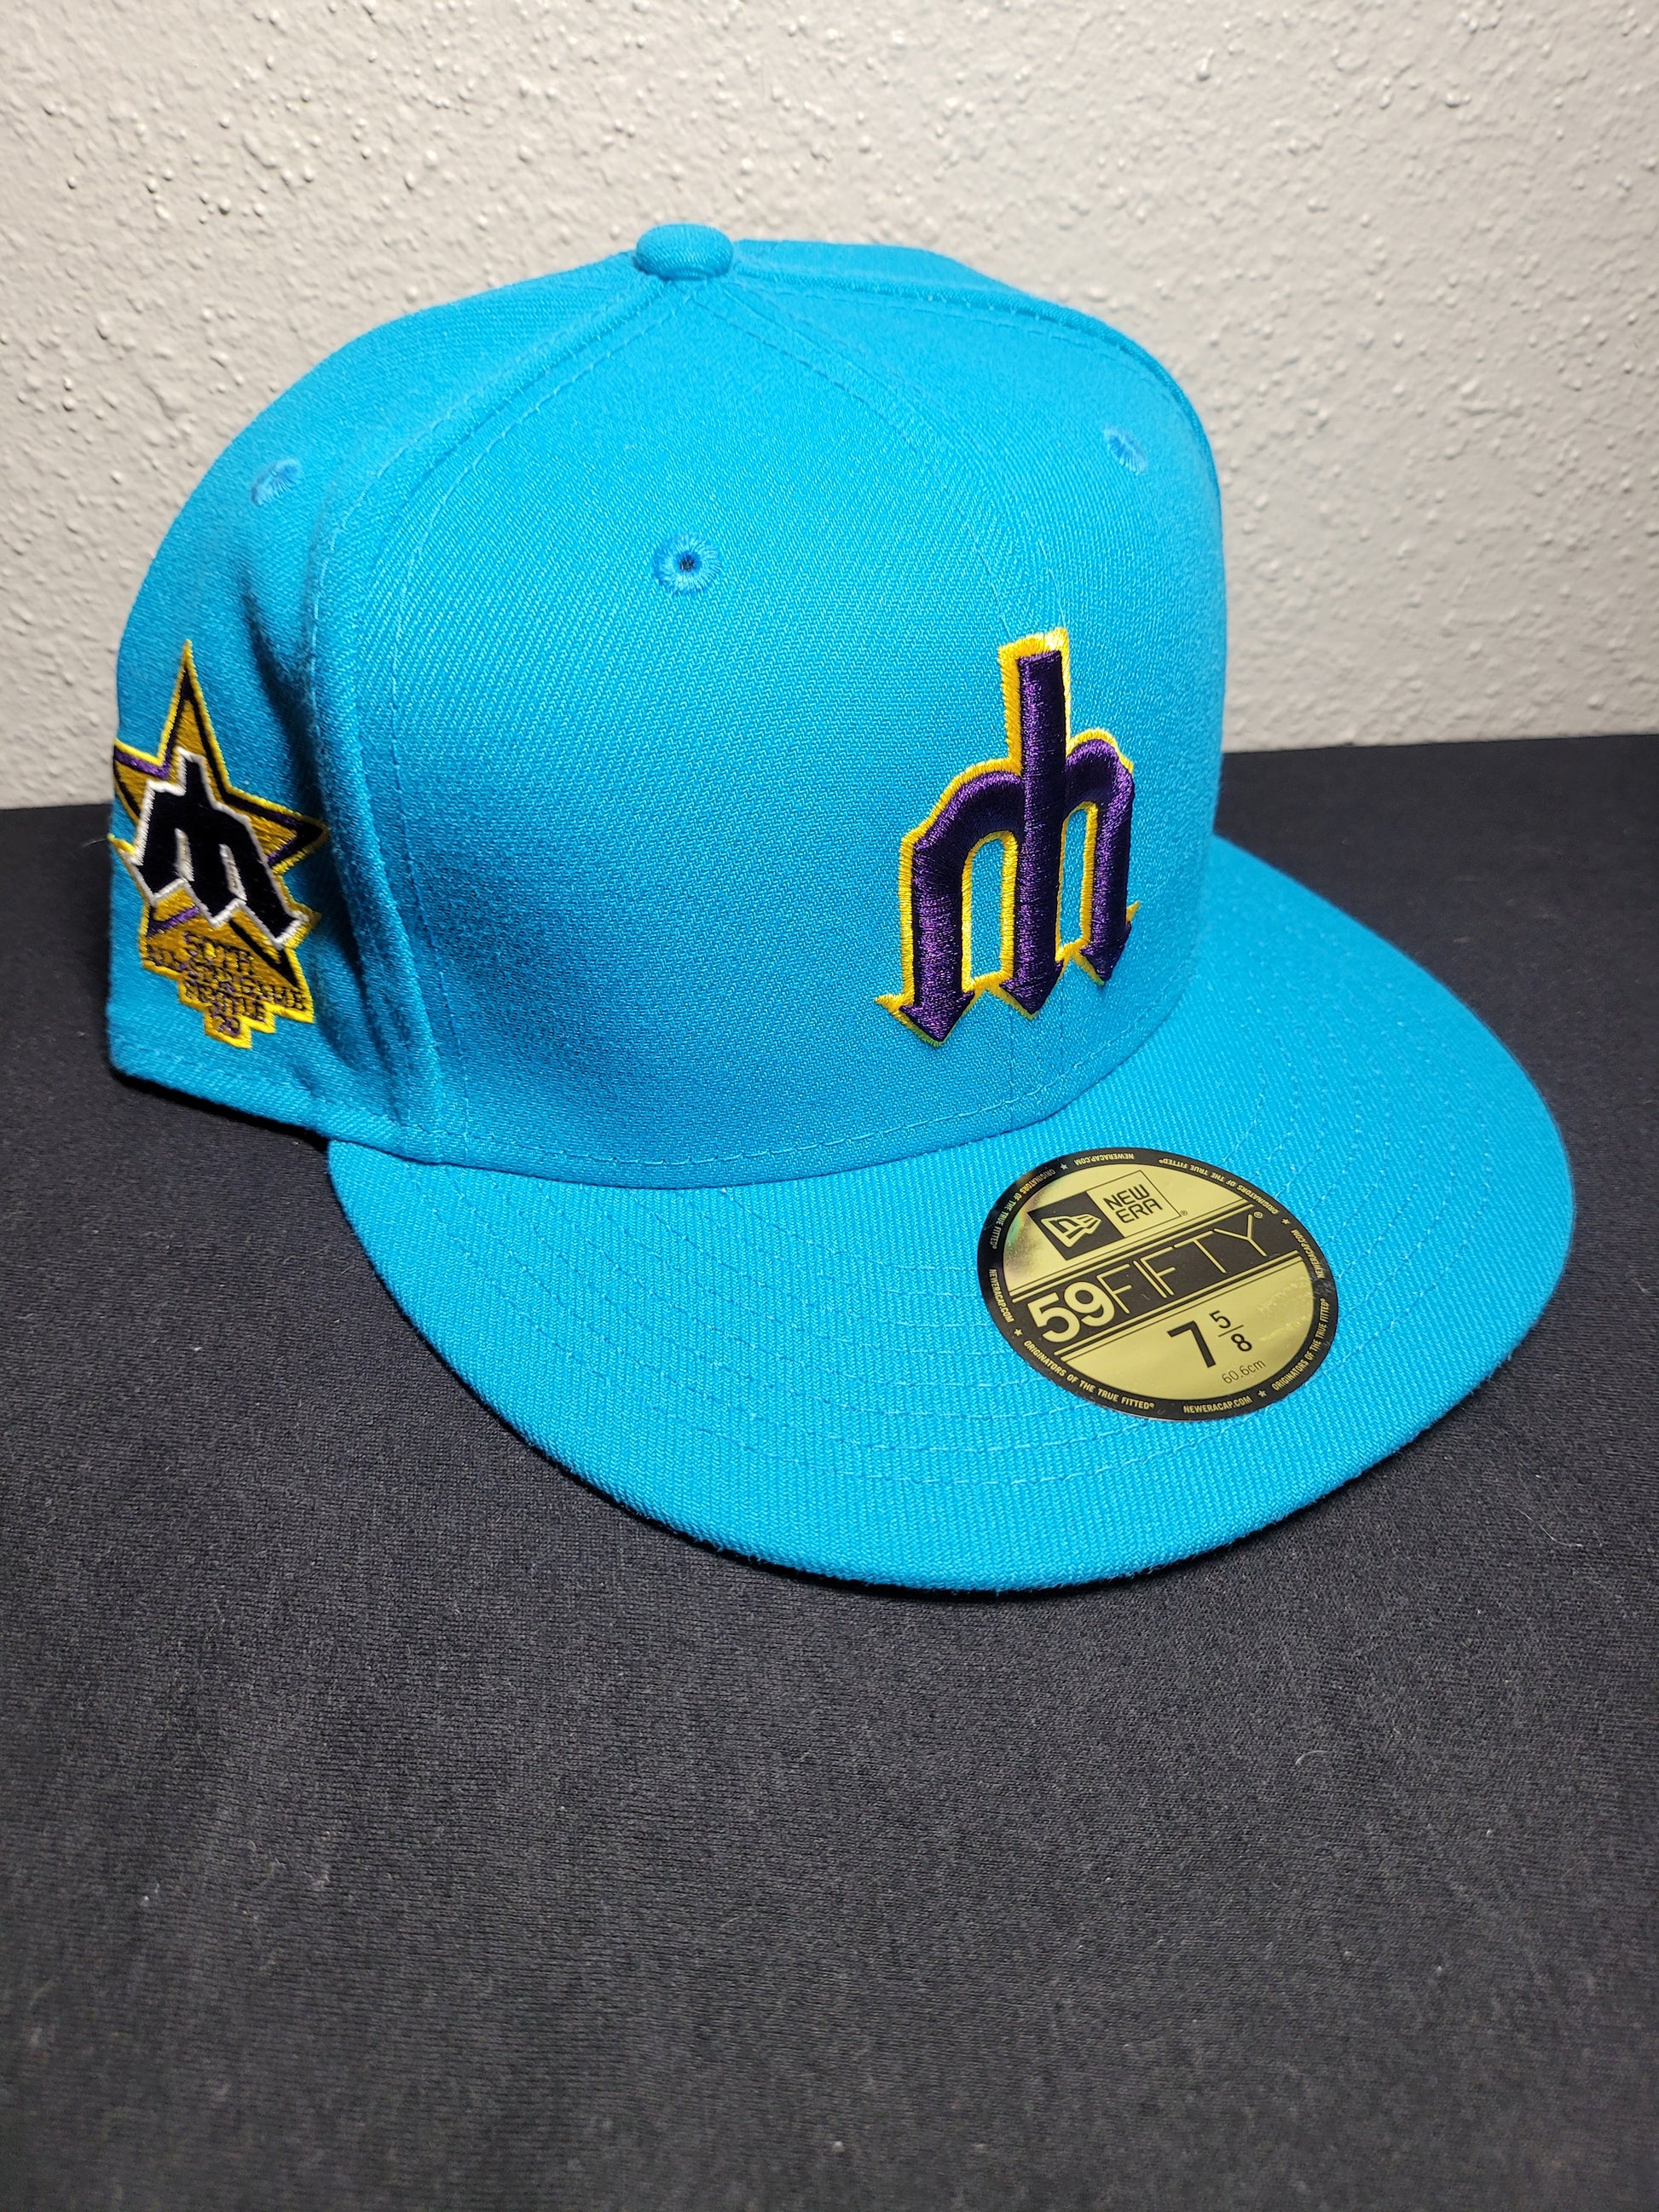 Seattle Mariners New Era Hat – Fitted BLVD